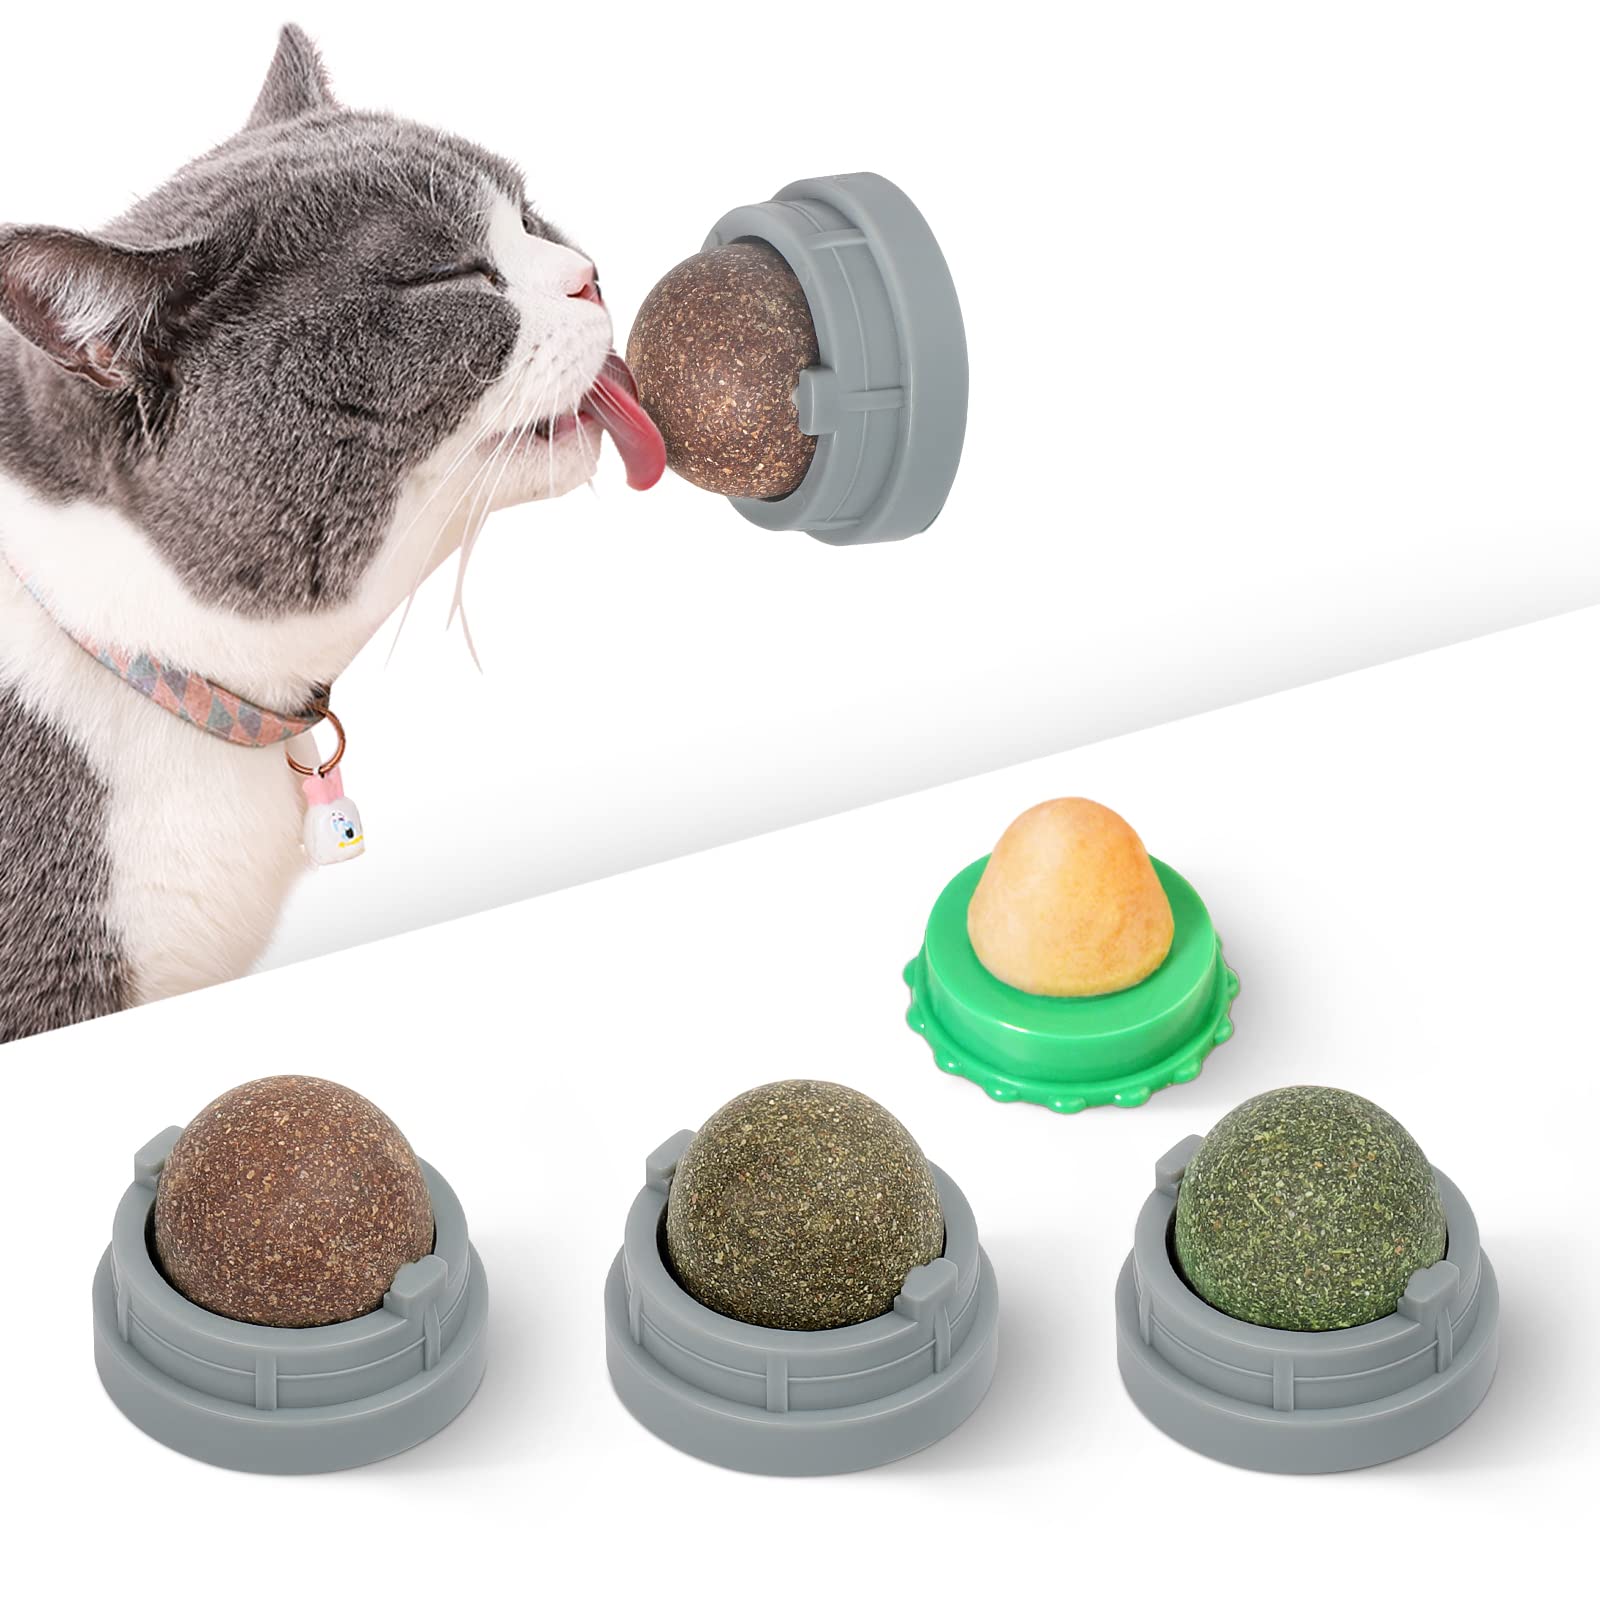 Catnip-infused ball pit